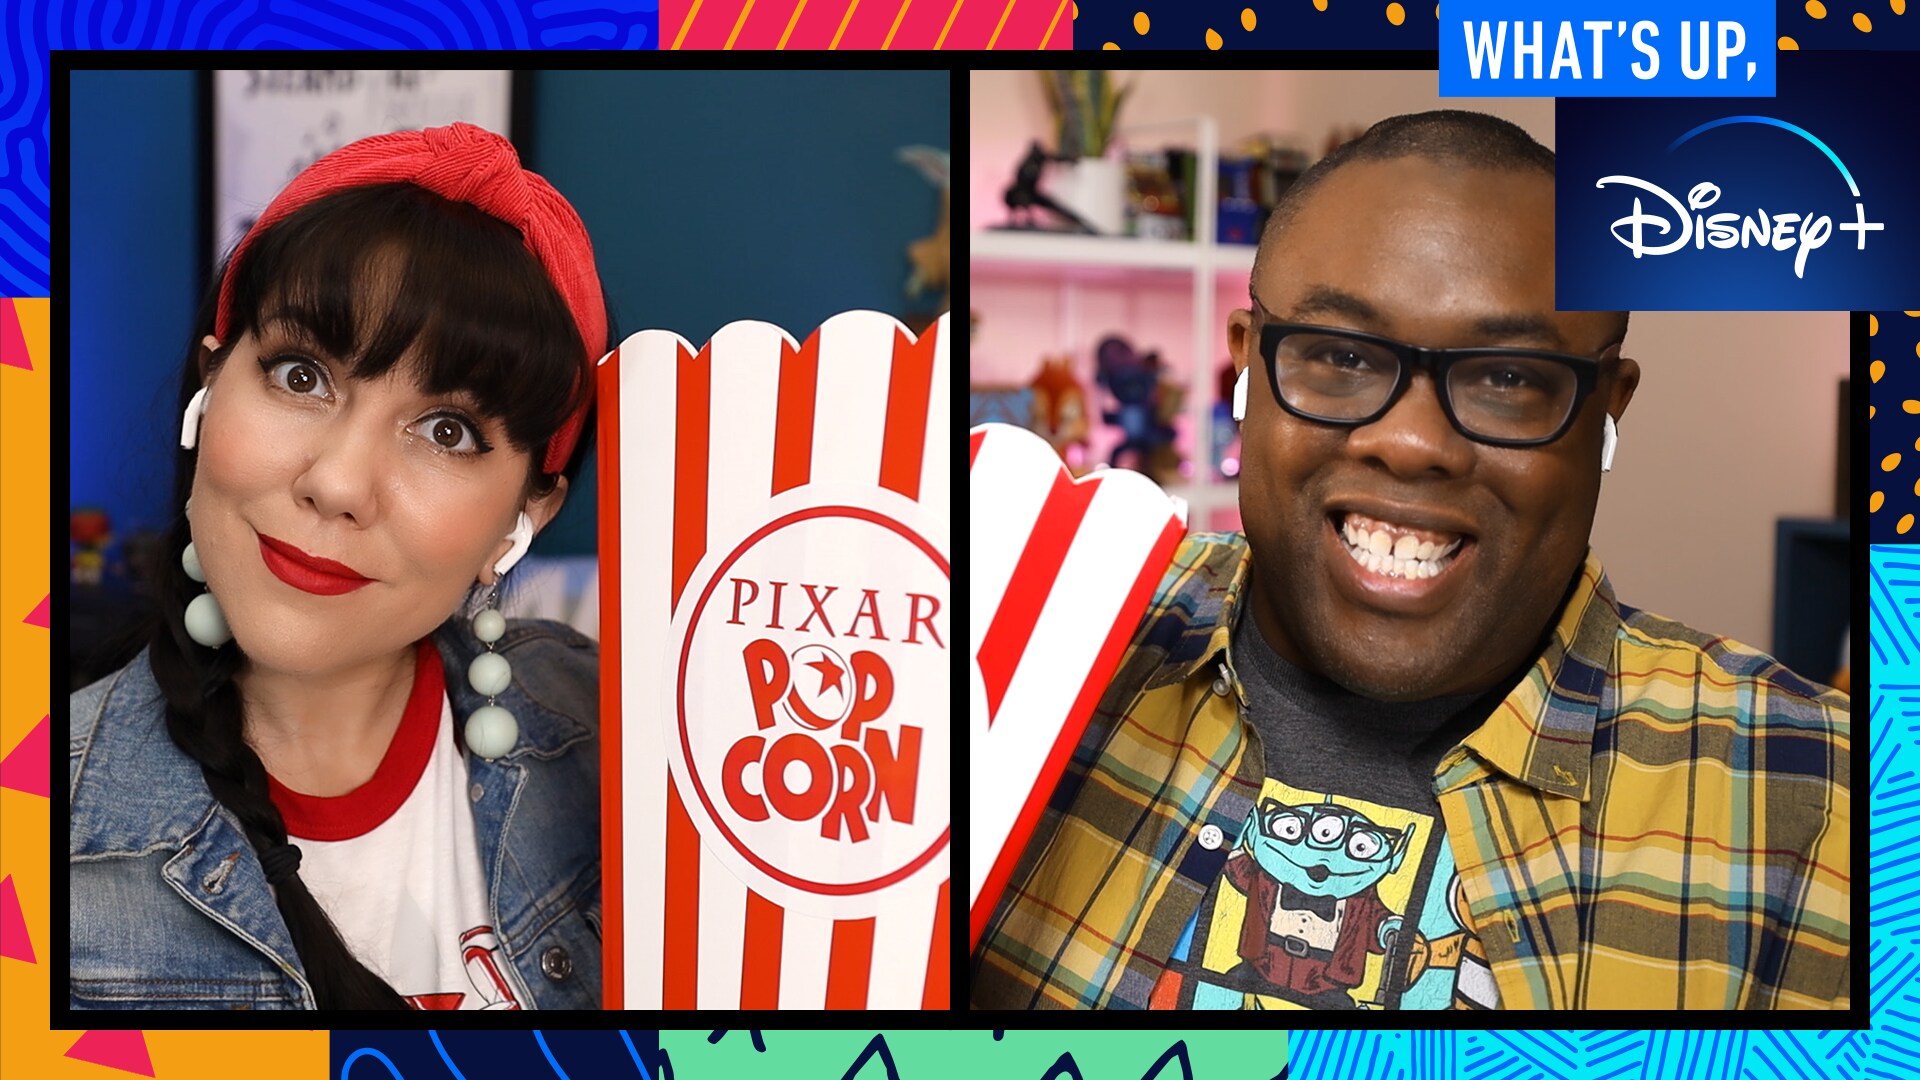 Pixar Popcorn Trivia and One Hundred and One Dalmatians' 60th Anniversary | What's Up, Disney+ | Episode 12